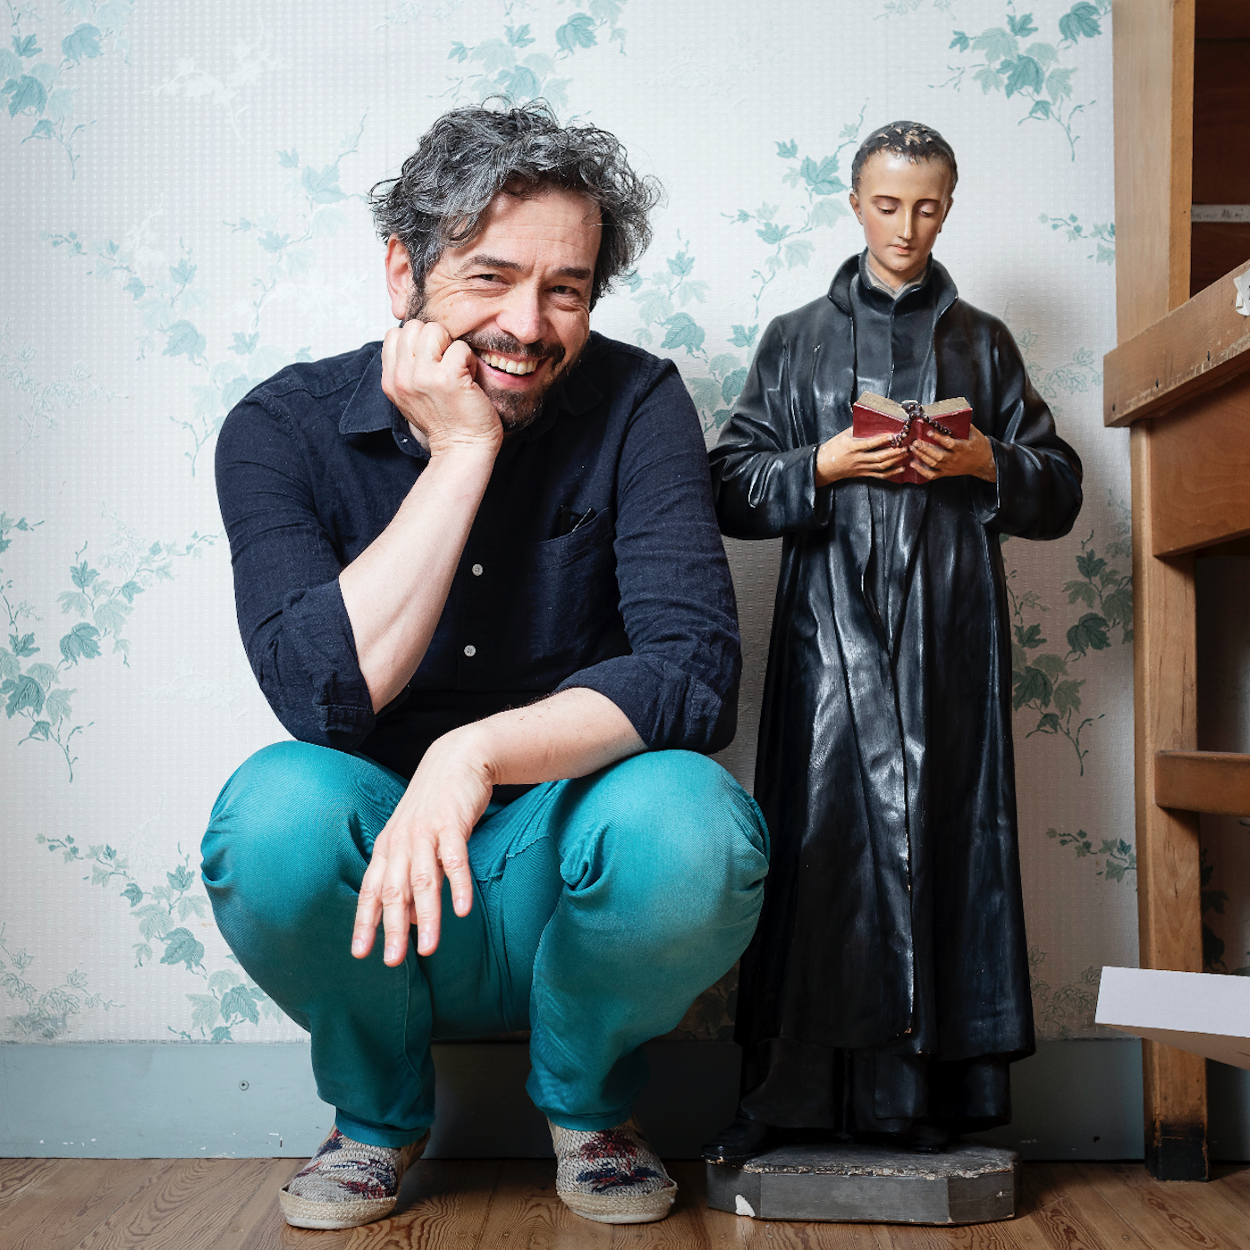 portrait of a man smiling next to a small statue